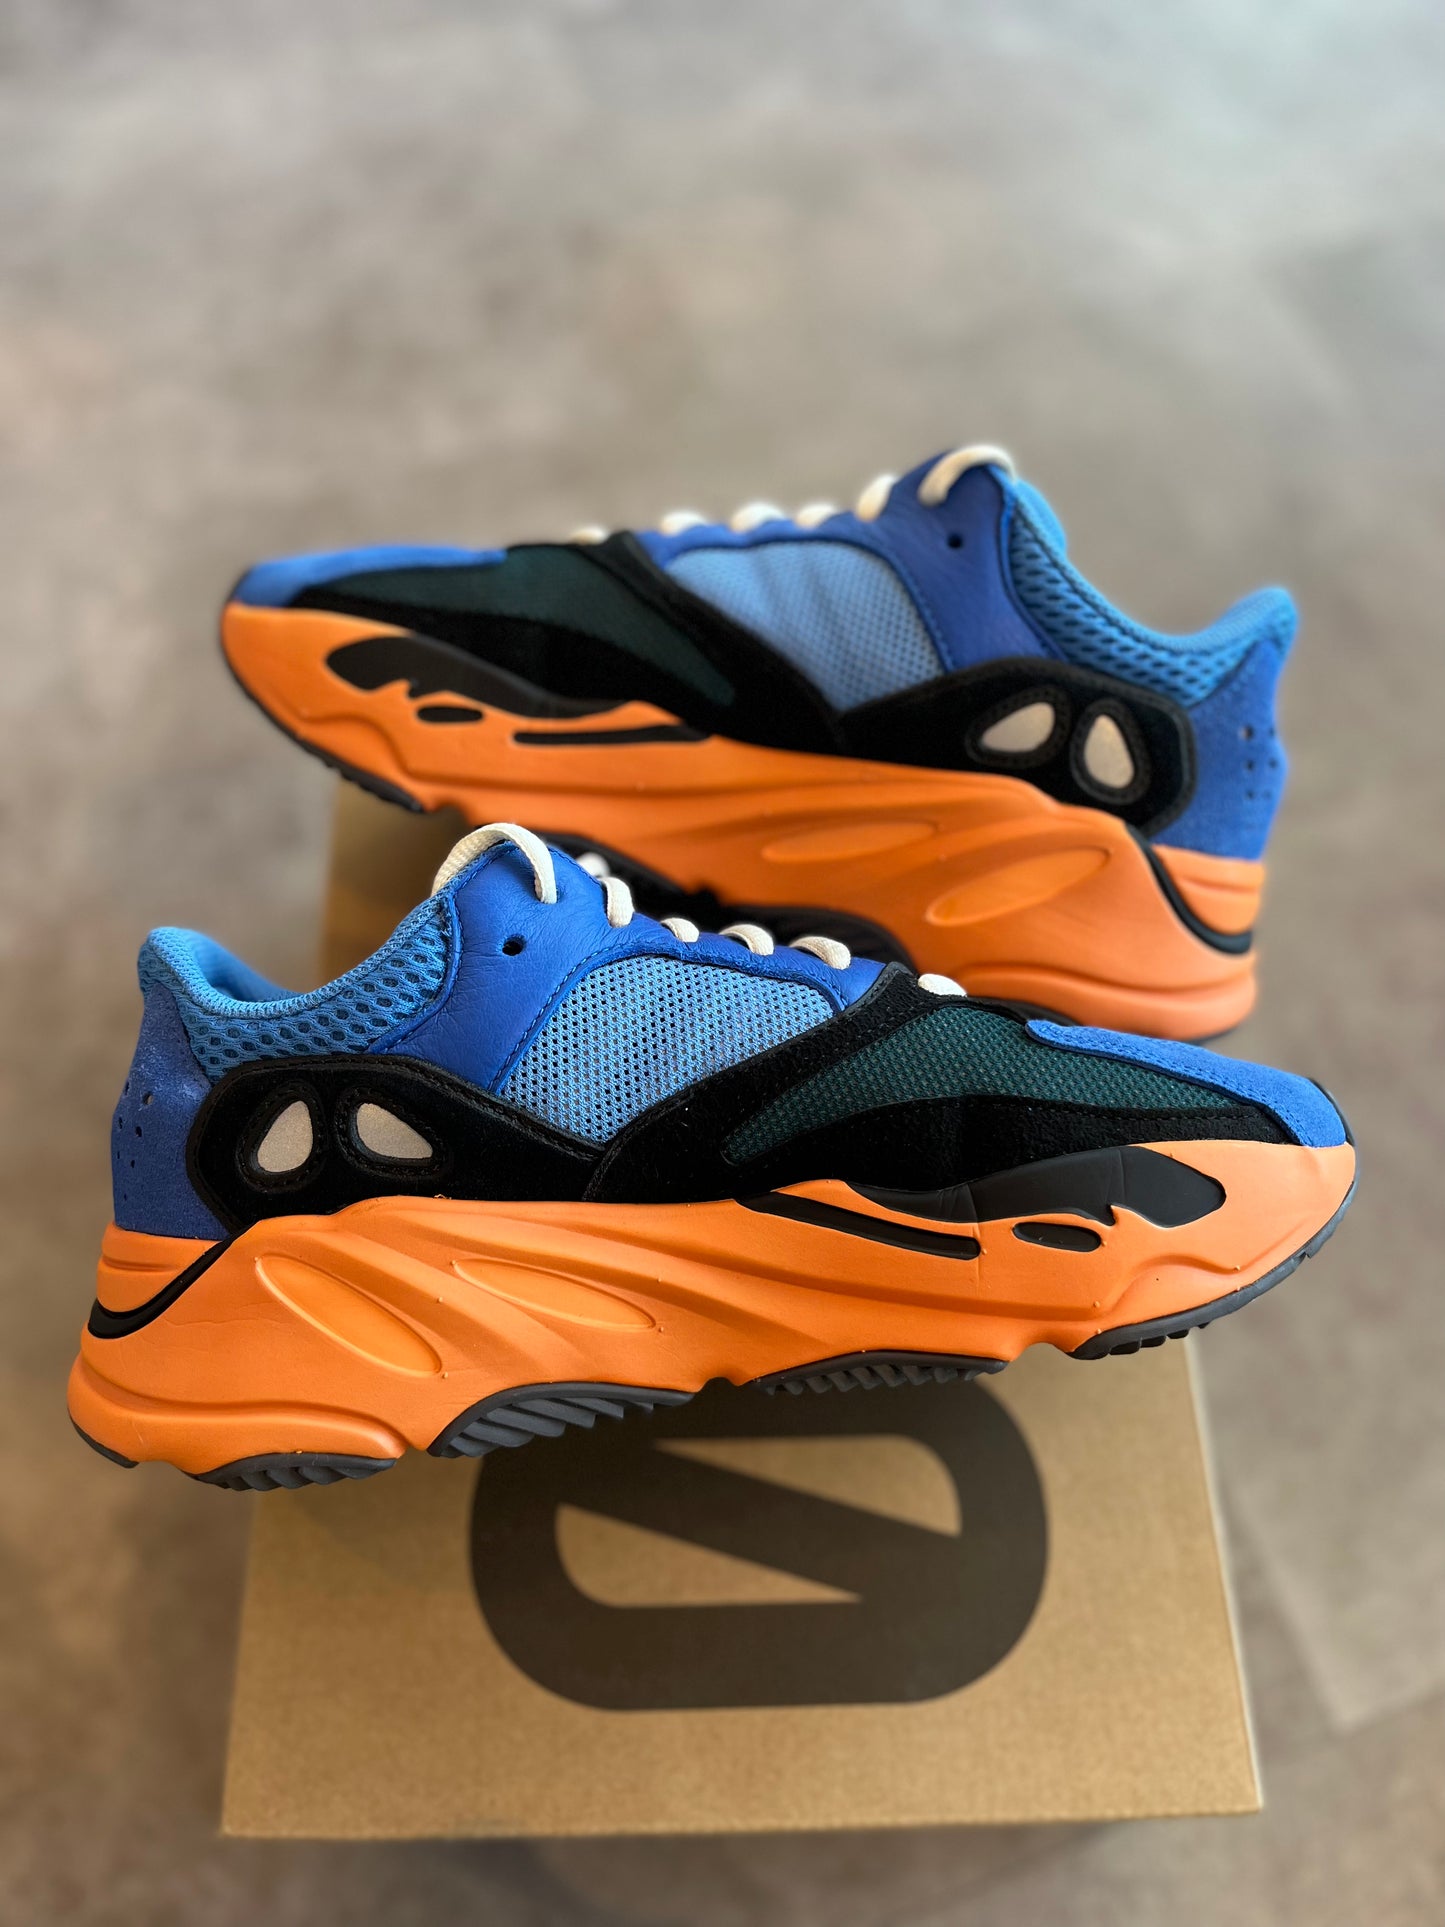 Adidas Yeezy 700 Bright Blue (Preowned)